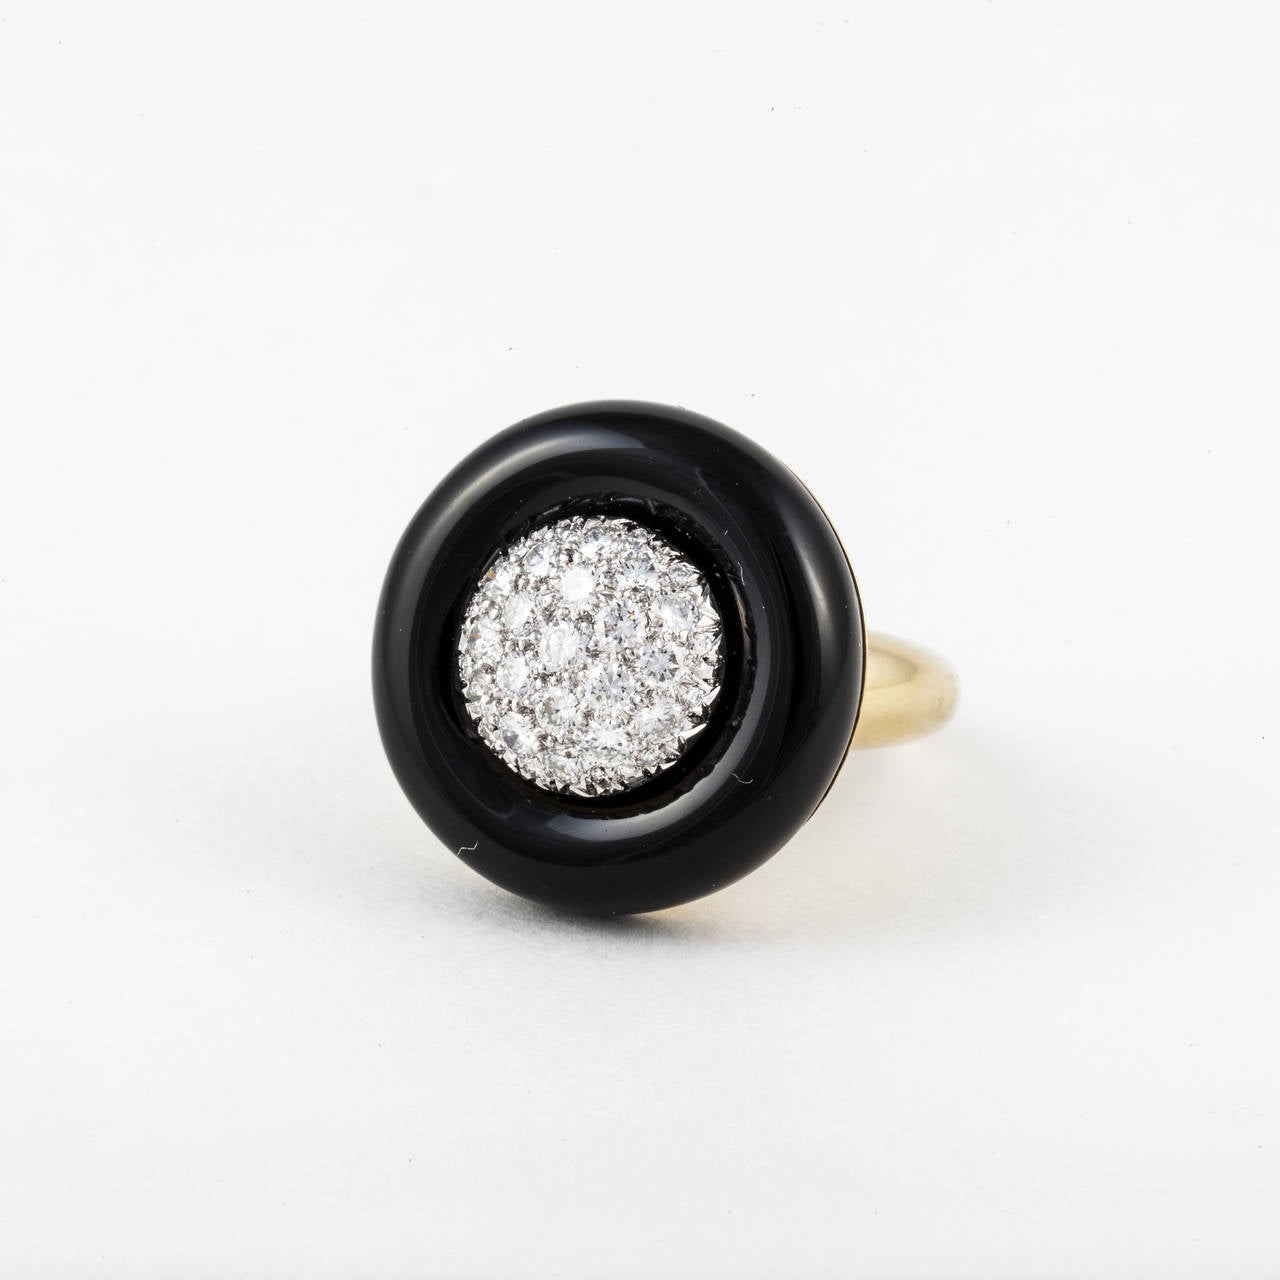 Estate ring in 18K yellow gold featuring a black onyx disc with pavé diamonds in the center.  Ring is marked 